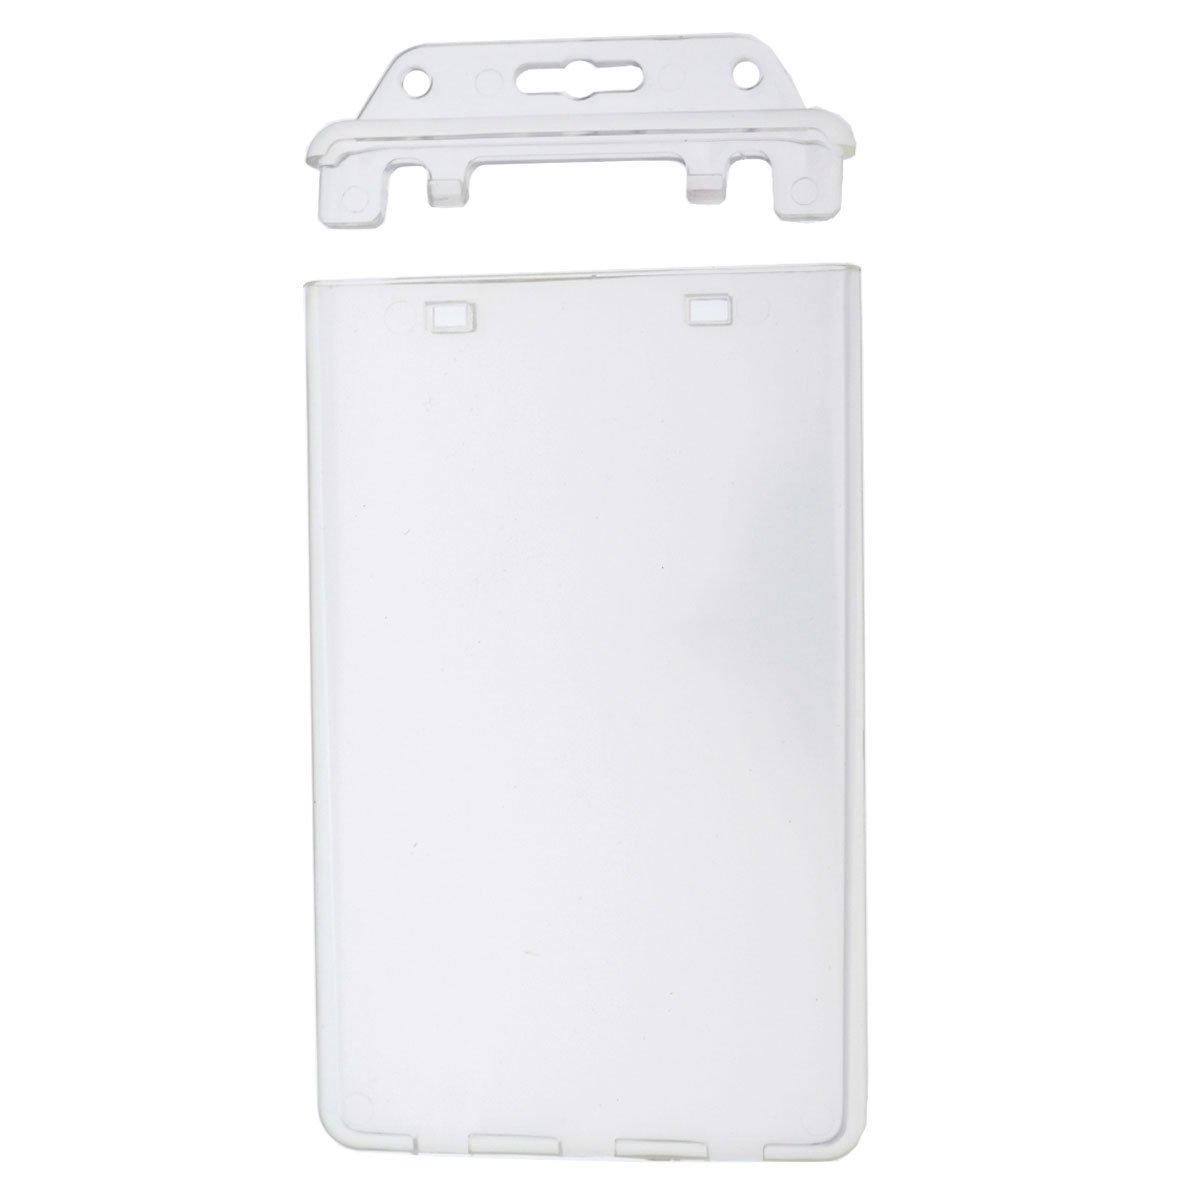 Permanent Locking Hard Plastic Badge Holder - Vertical Clear Heavy Duty Secure Case Holder for One or Two I'd Cards by Specialist ID